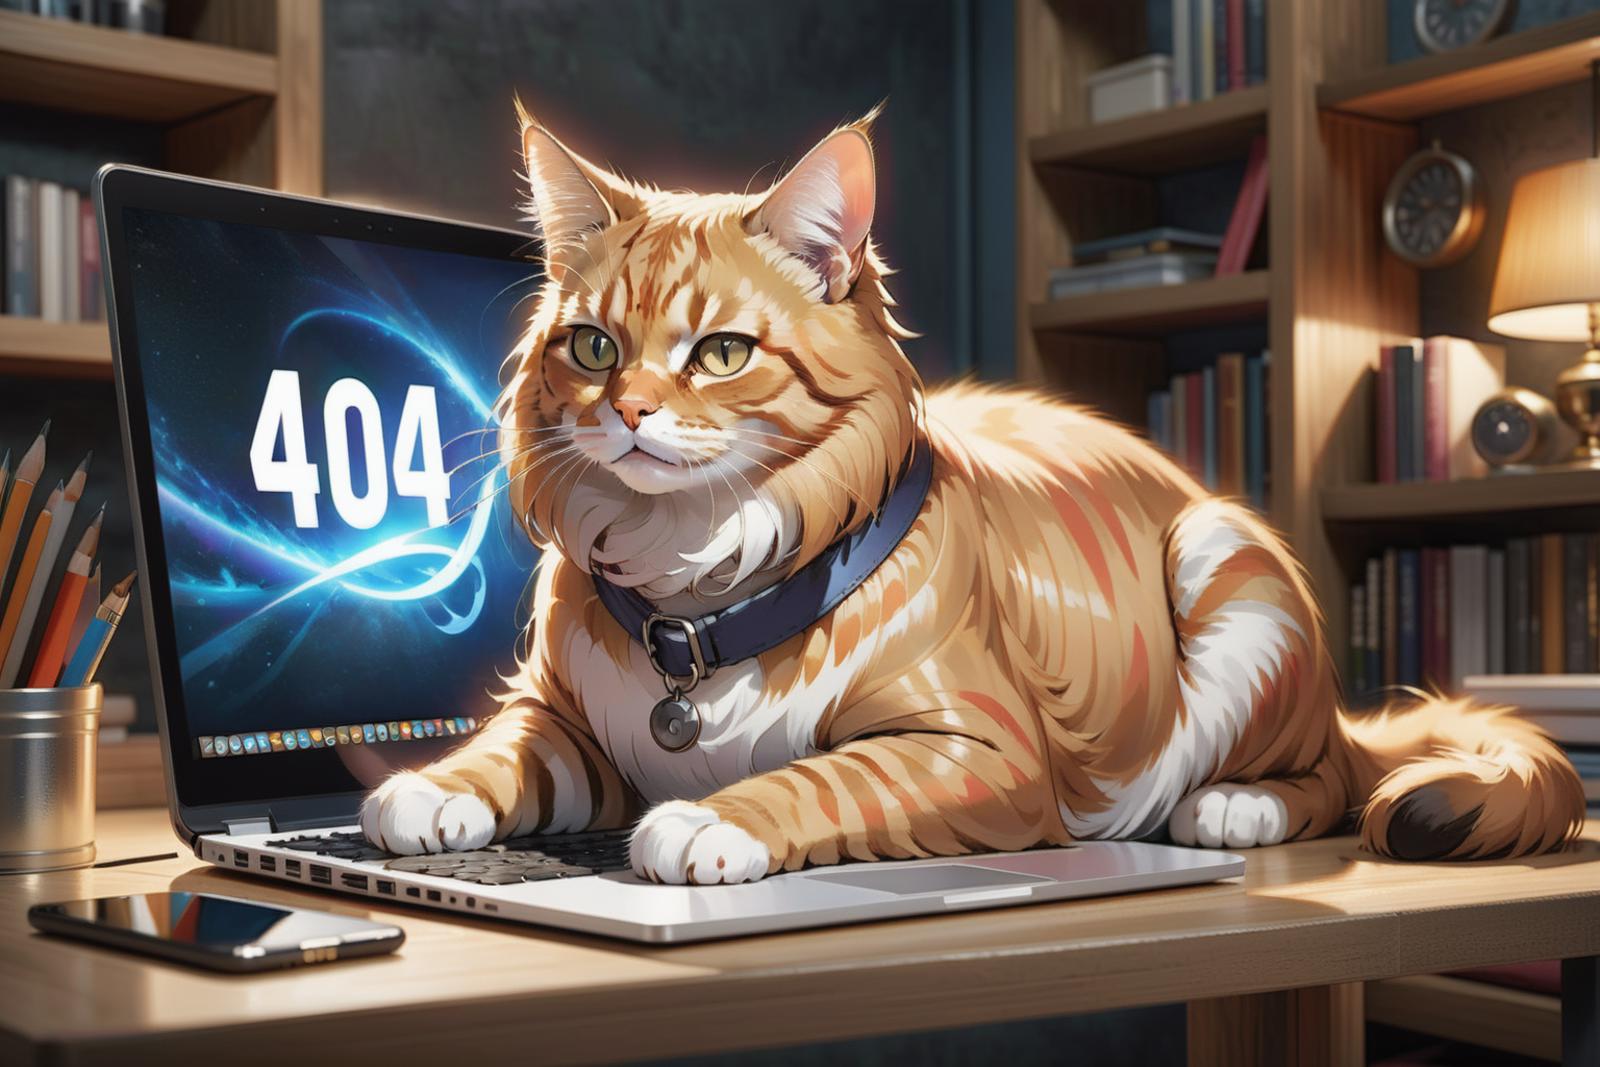 A cat sitting on a laptop computer.